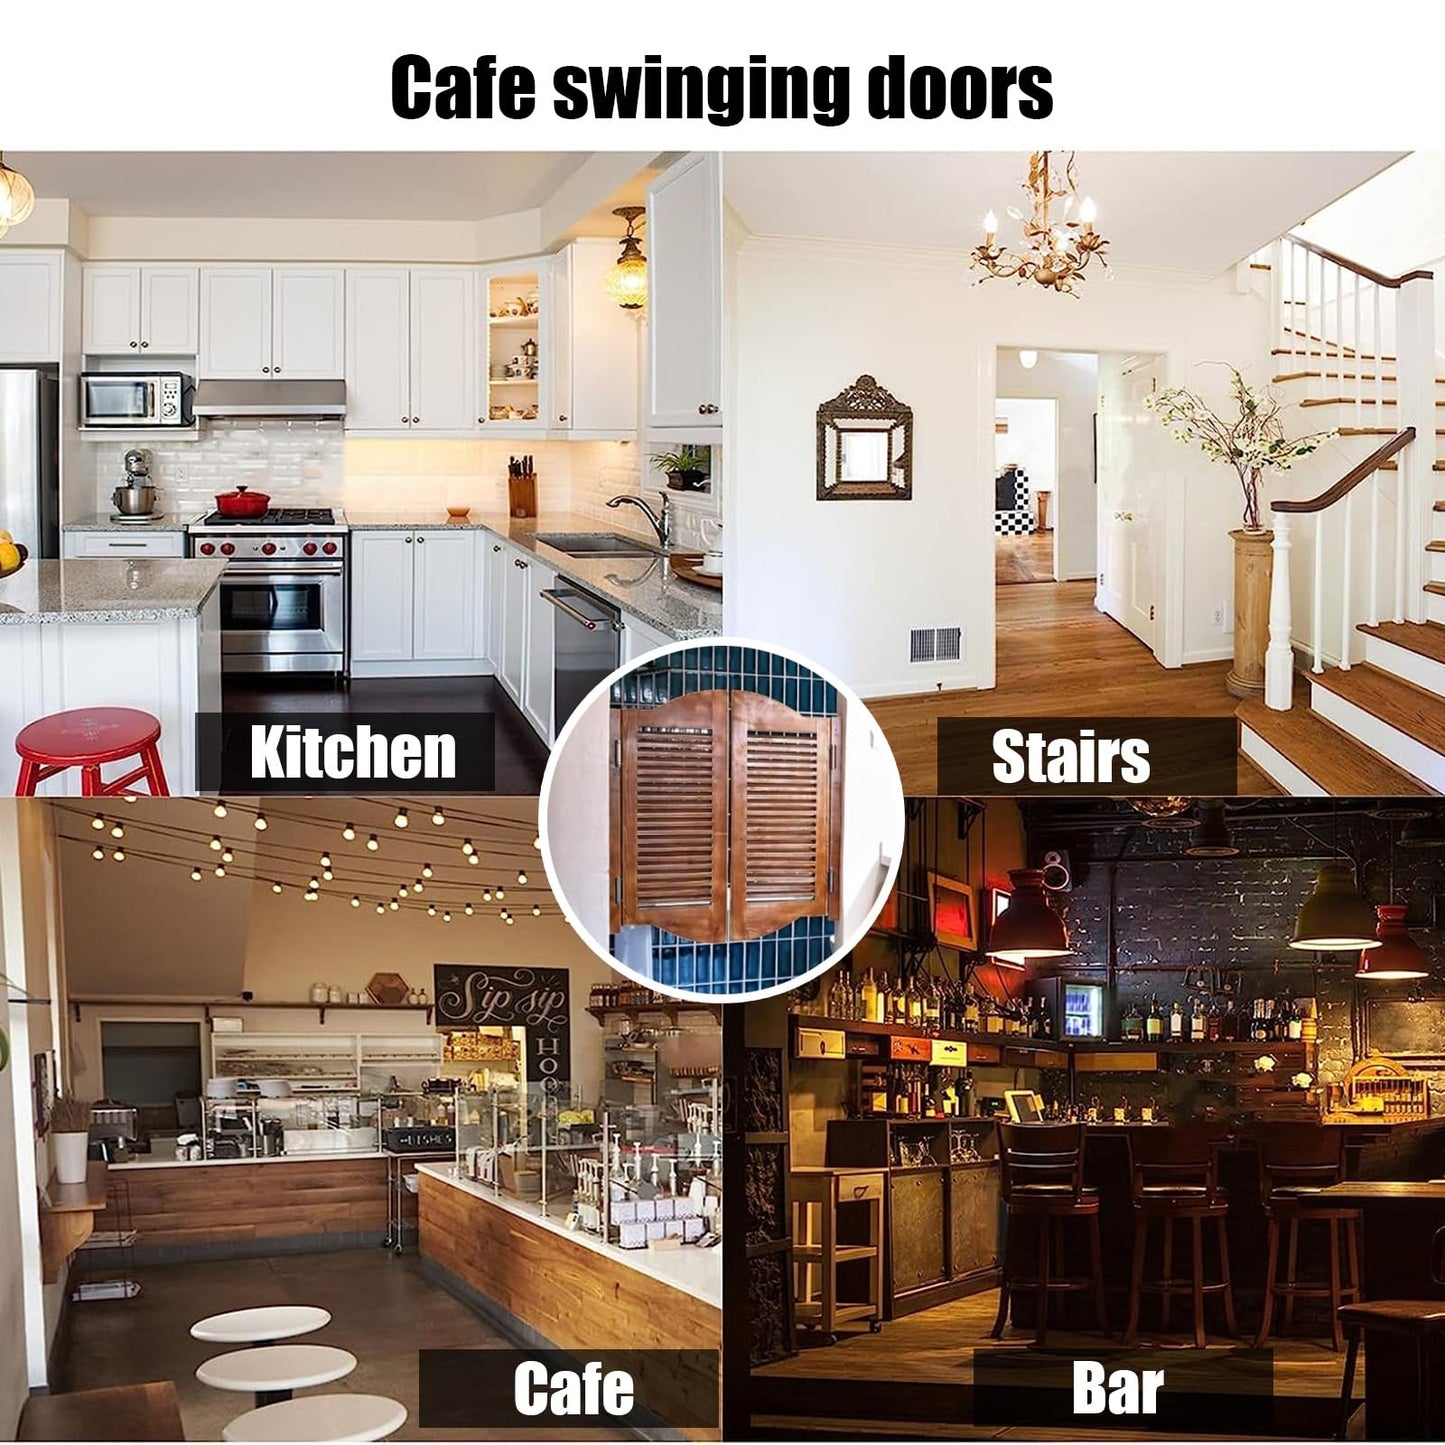 Swinging Door Cafe Door, Indoor Solid Wood Saloon Door ,Includes Hinges,Cafe Swinging Doors，saloon doors for Kitchen Shop Entrance Partition Pub, Painted Finished ( Size : W120xH80cm(47.24x31.49in) )